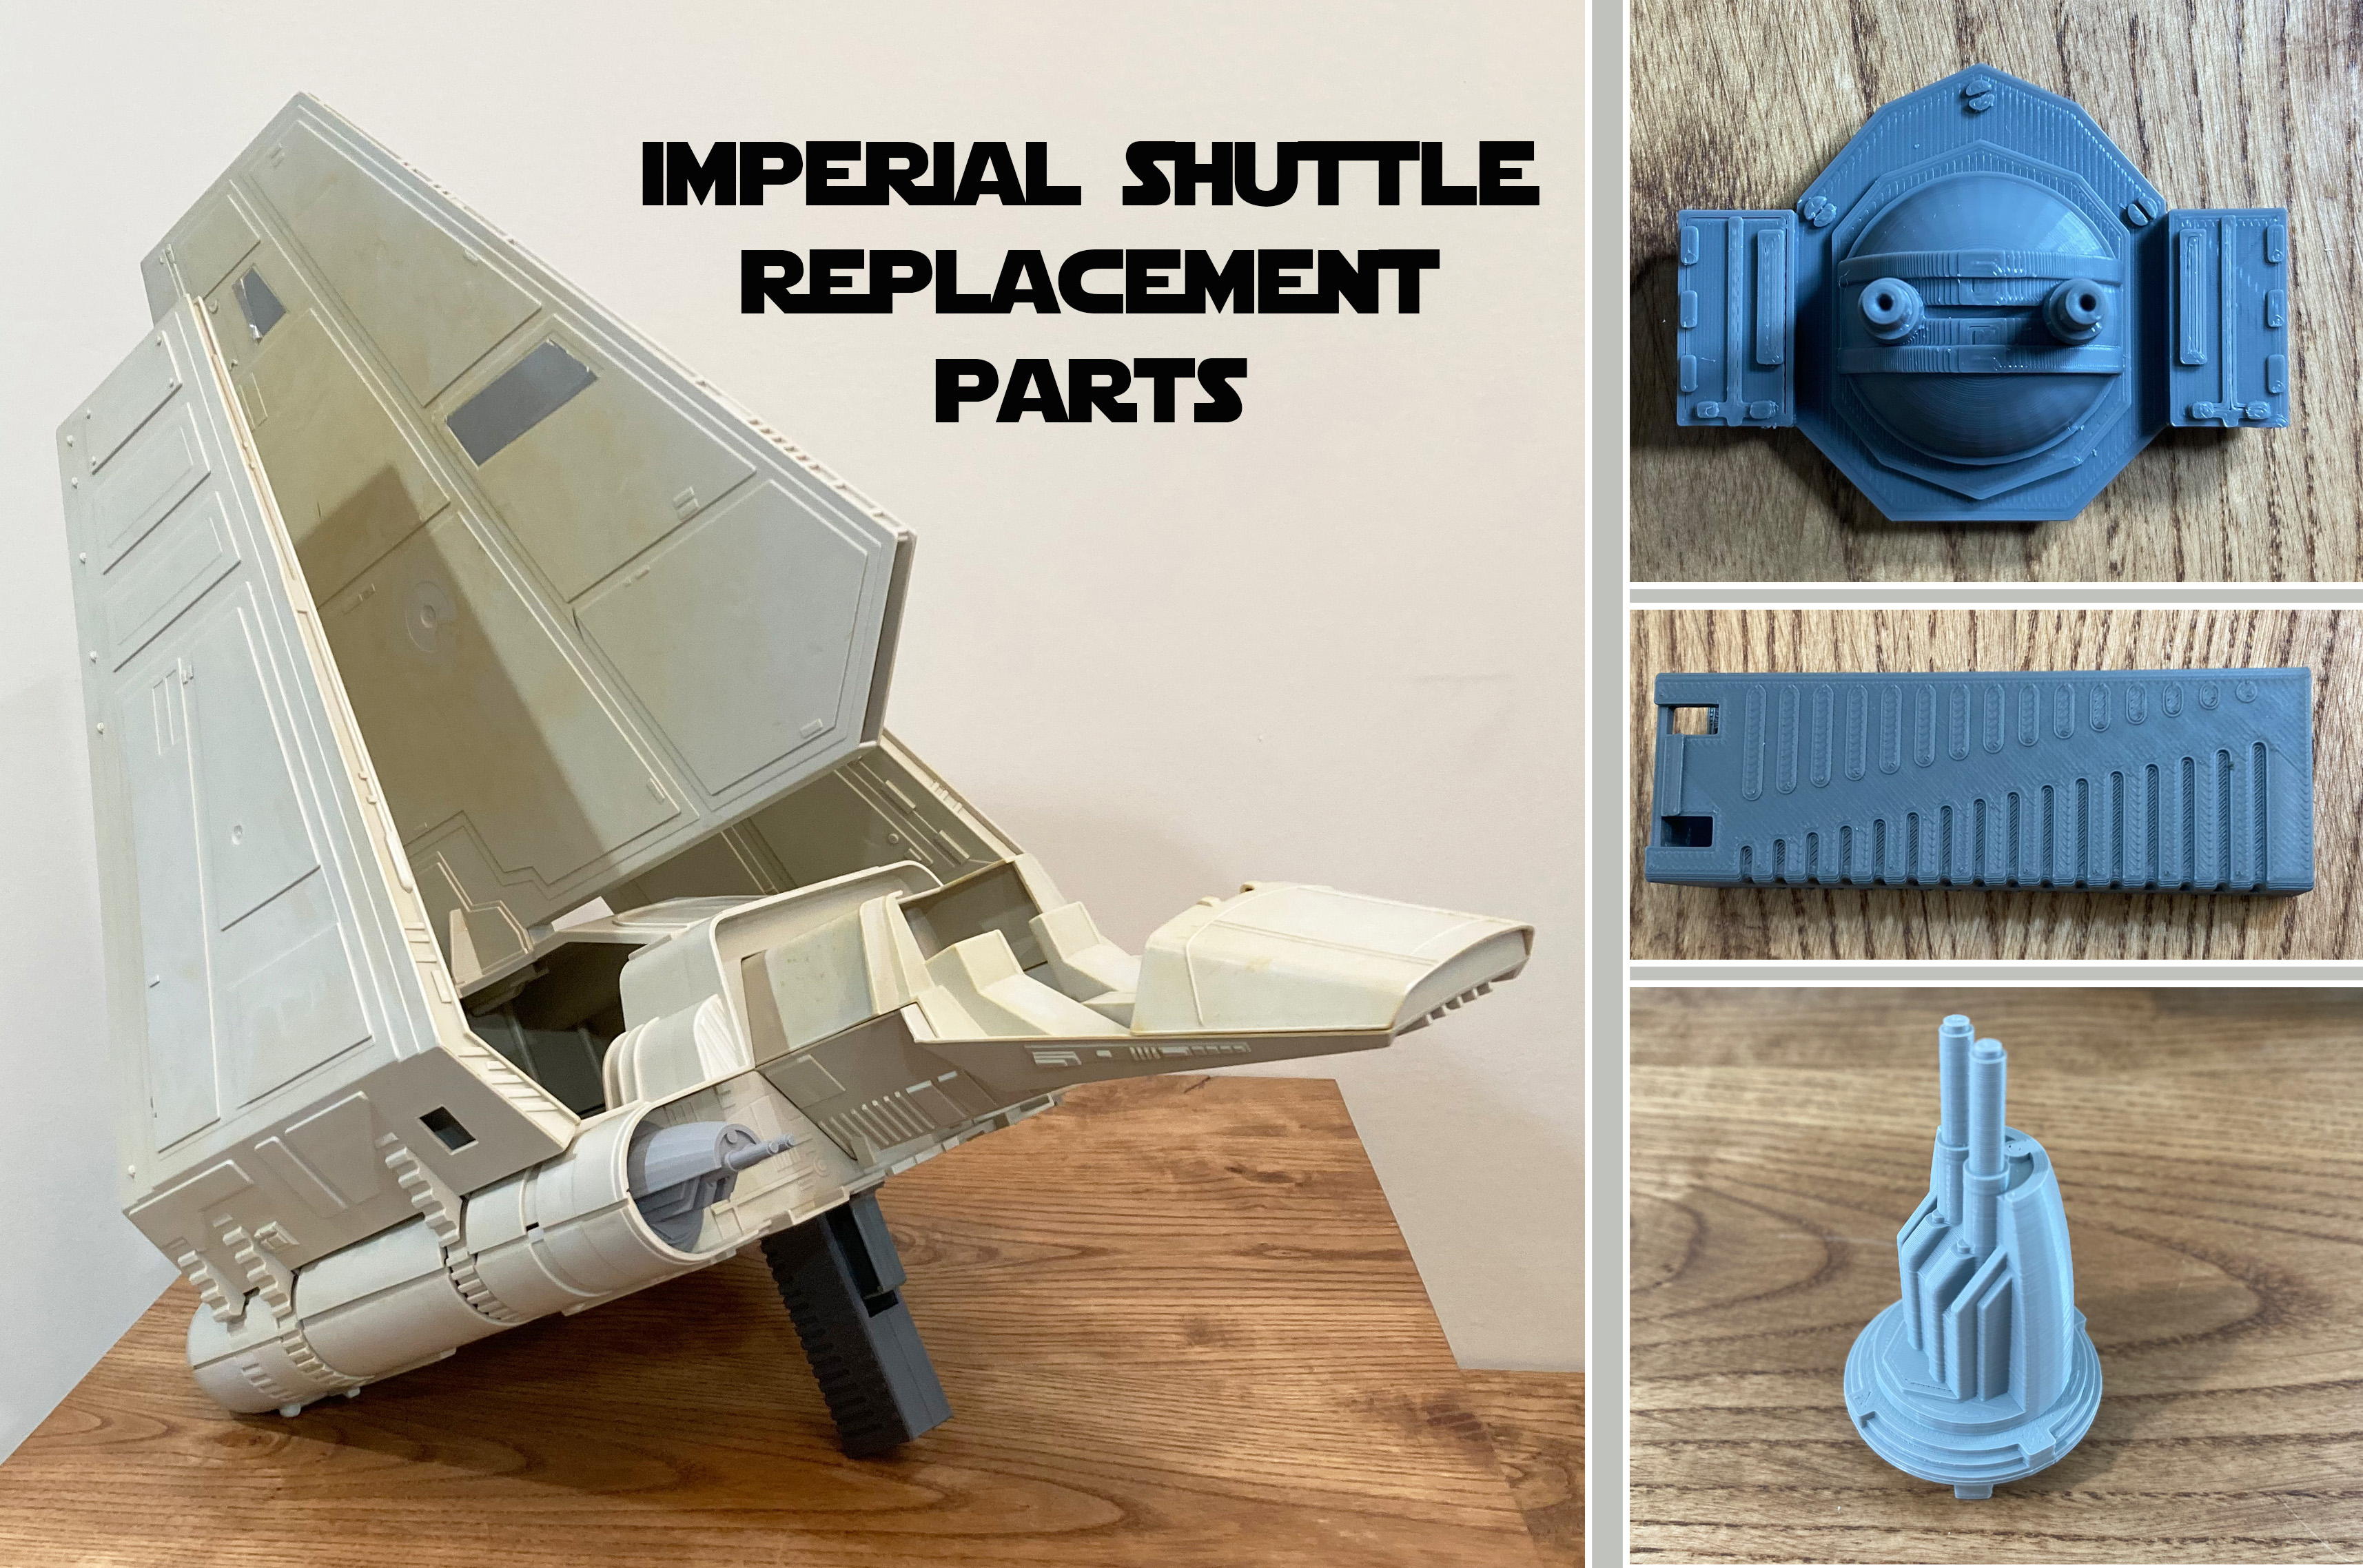 Are you missing parts for your vintage Imperial Shuttle? We sell high quality replacement parts on our eBay store!